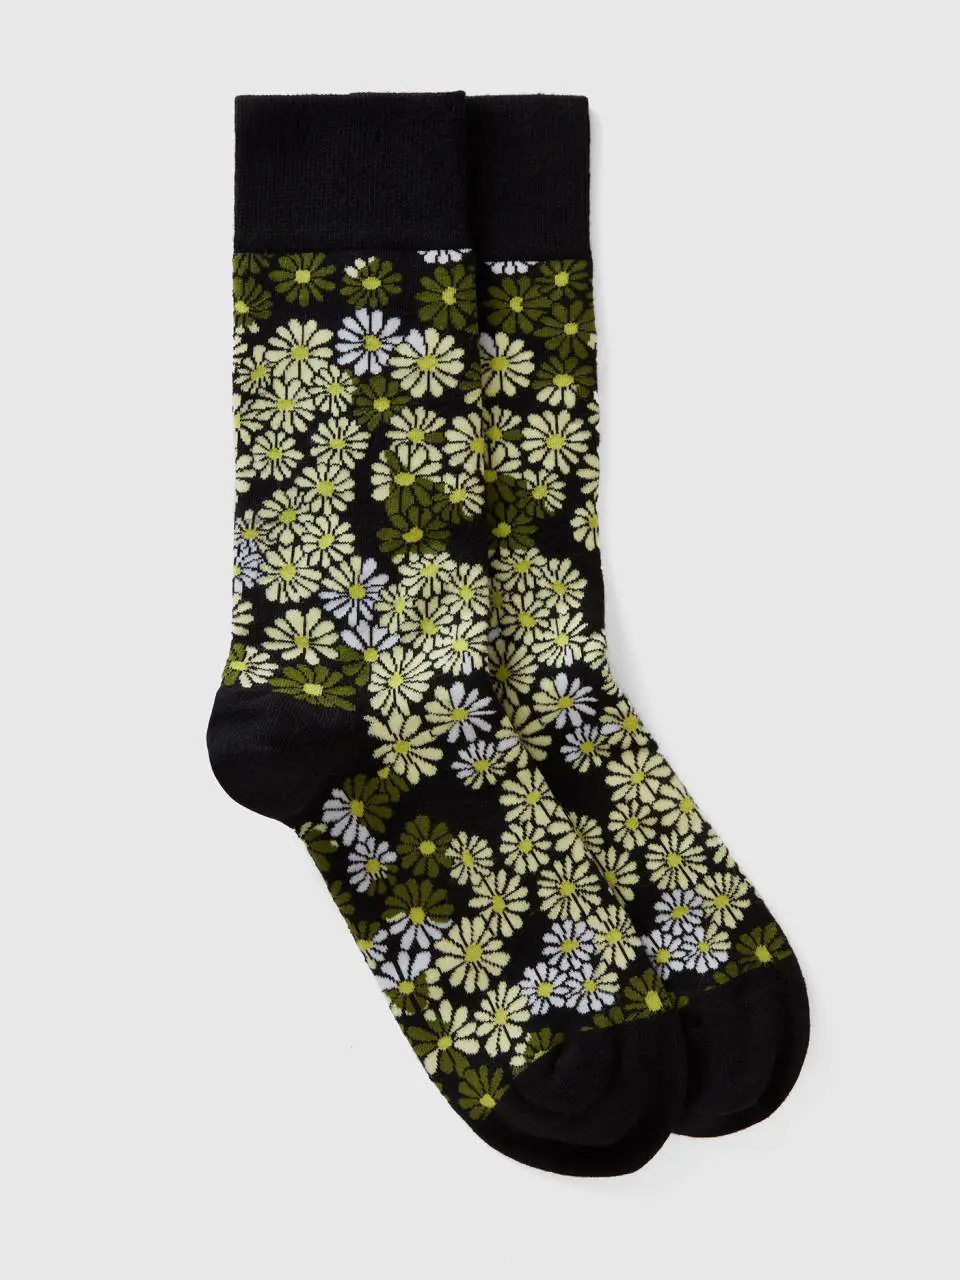 Benetton long black and yellow floral socks. 1